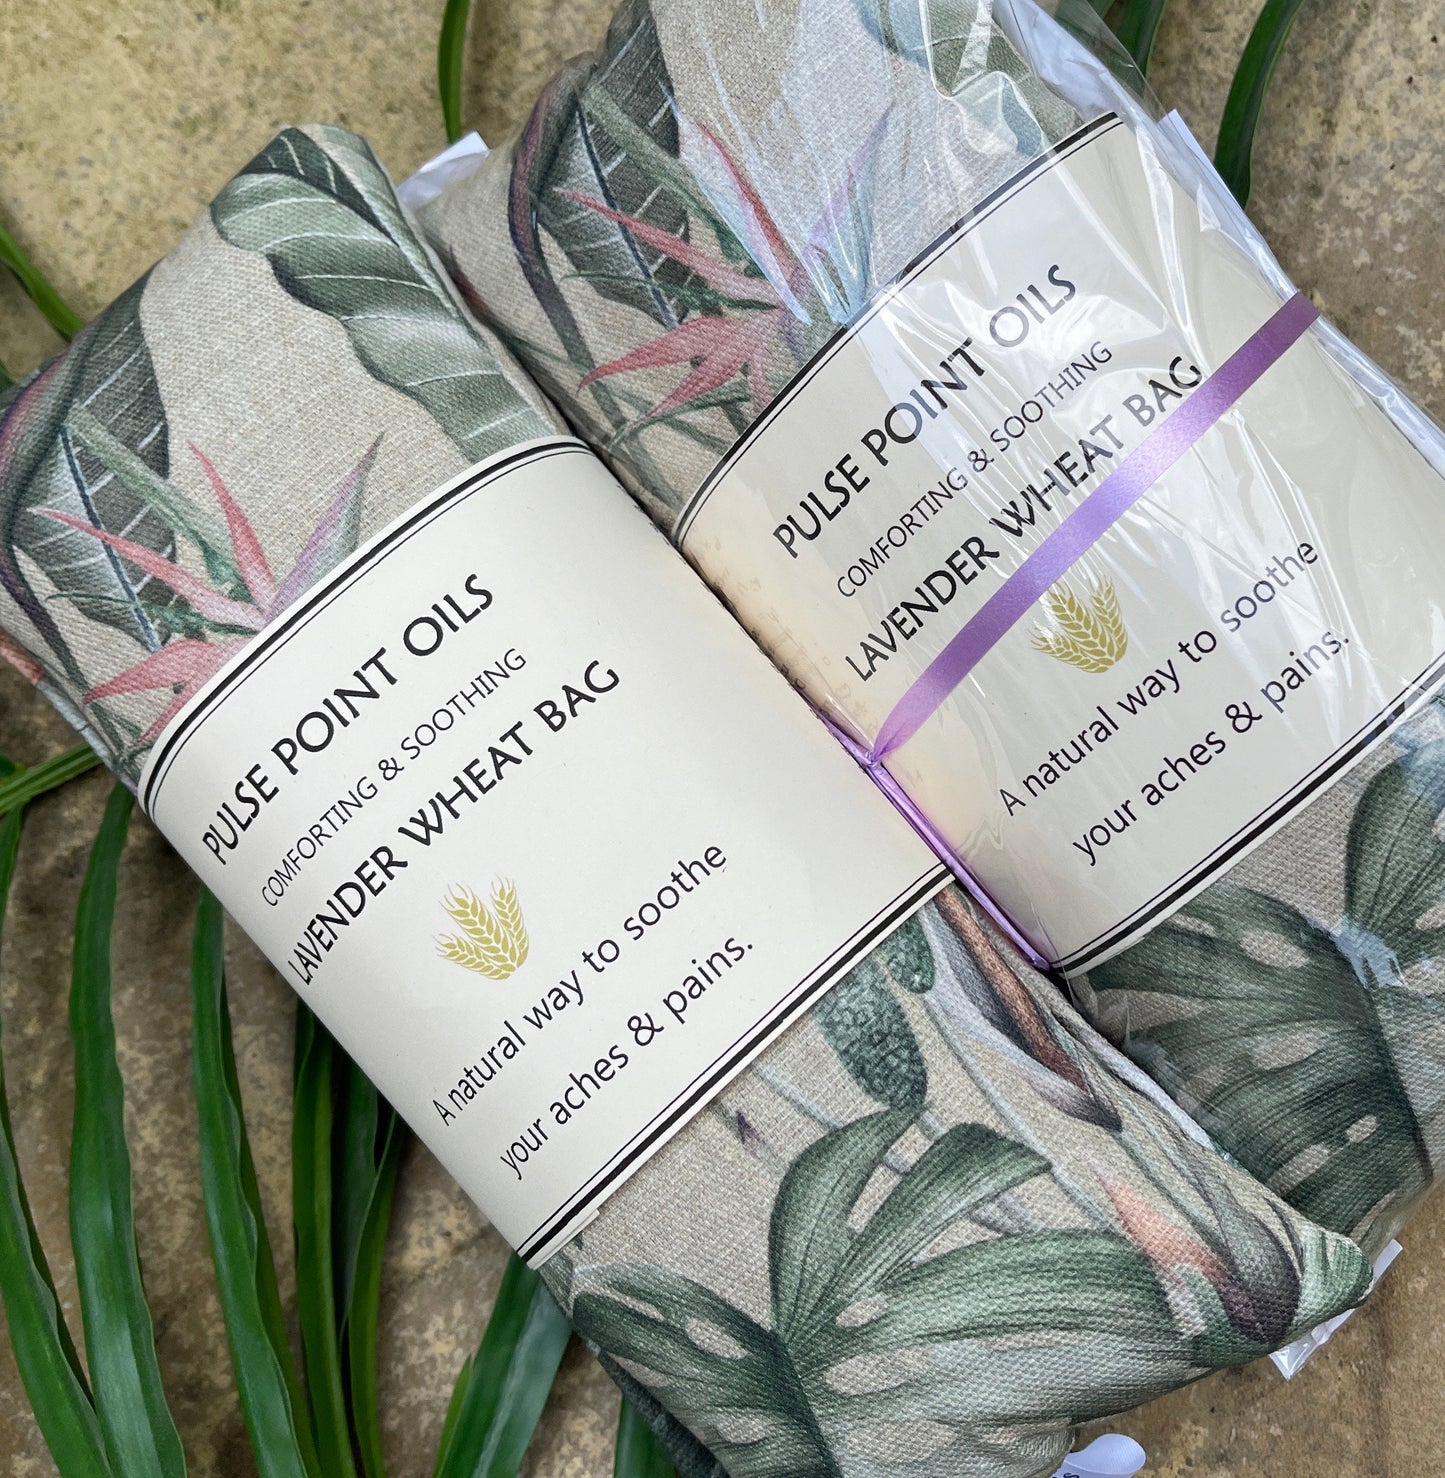 Lavender wheat bags, wellness and wellbeing gifts in tropical paradise print